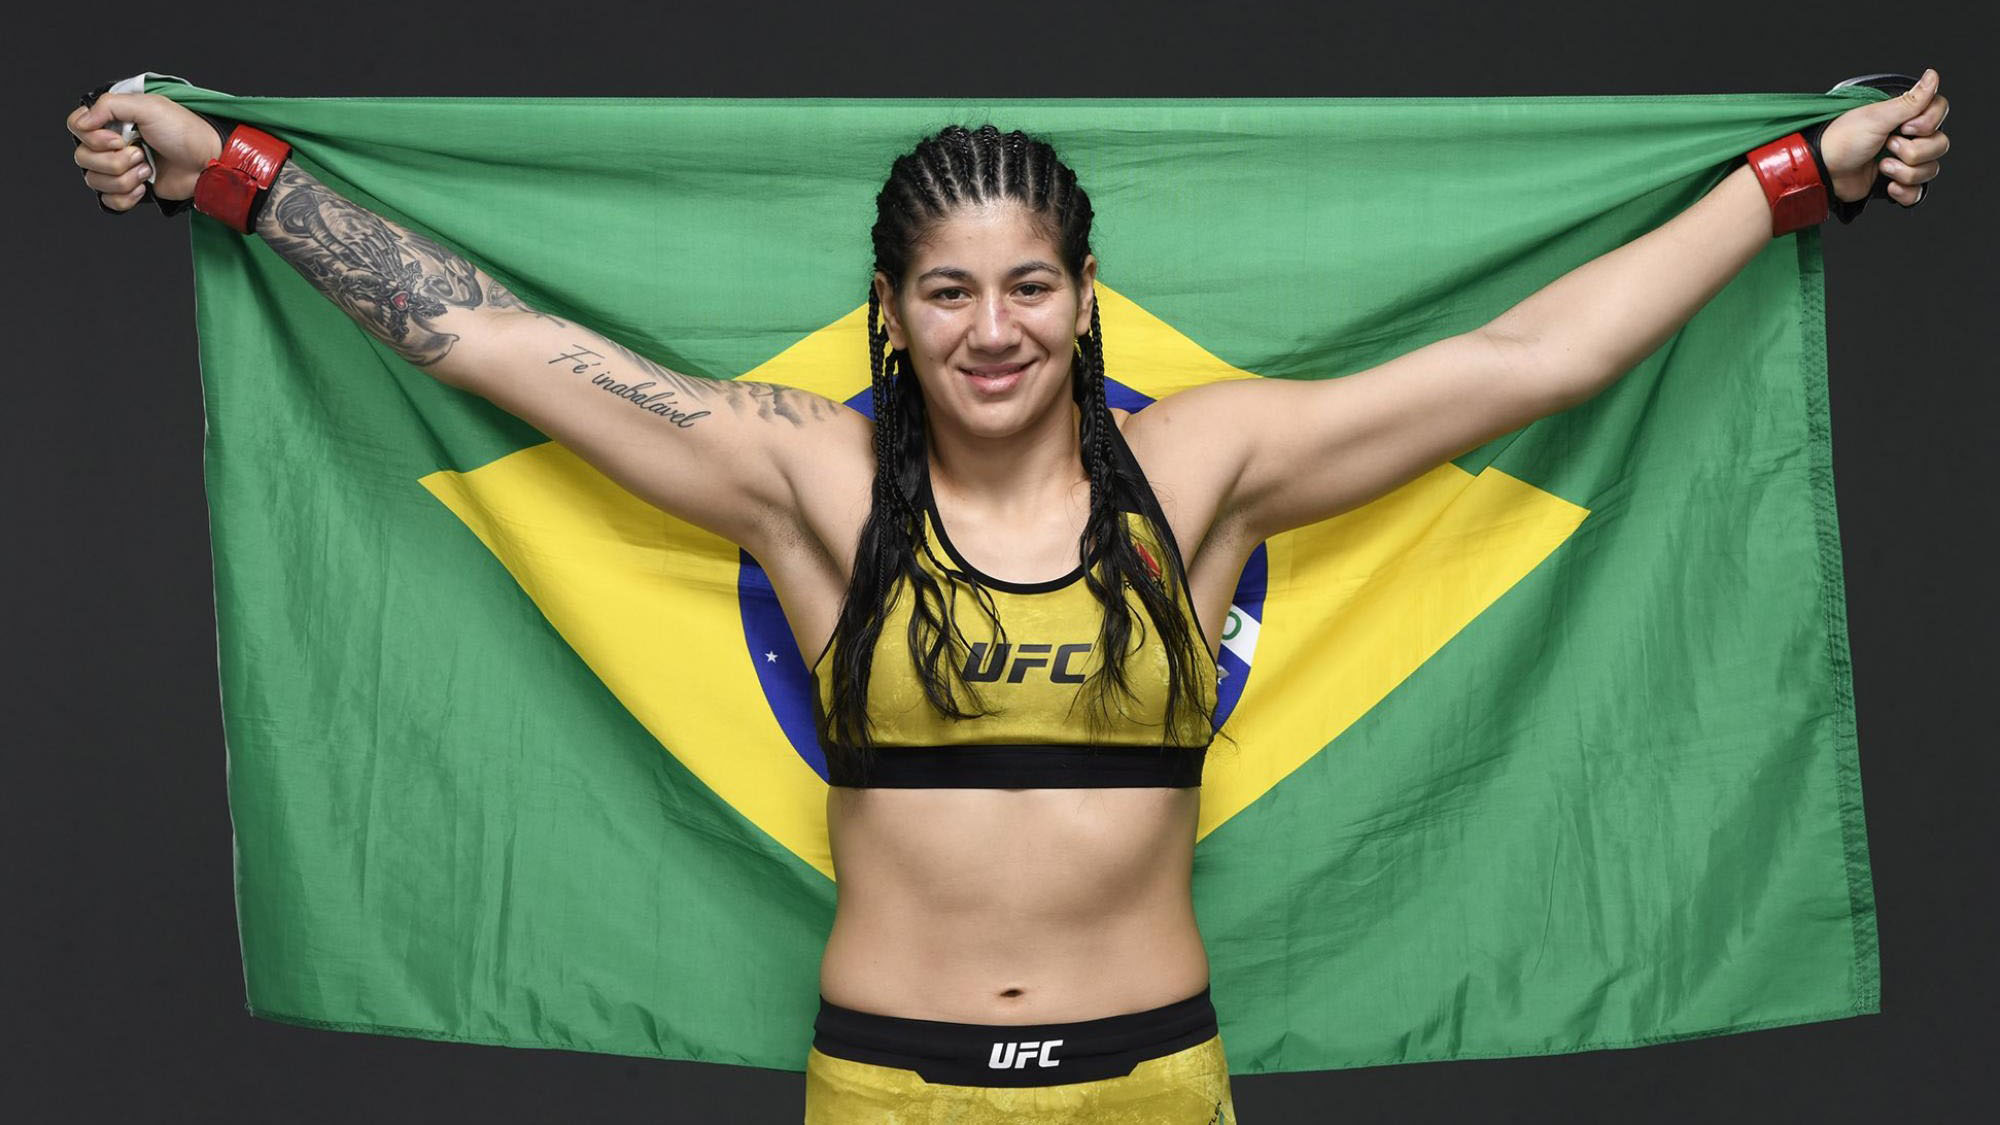 Ketlen Vieira da Silva (born August 26, 1991) is a Brazilian mixed martial artist and currently competes in the Bantamweight division of the Ultimate ...